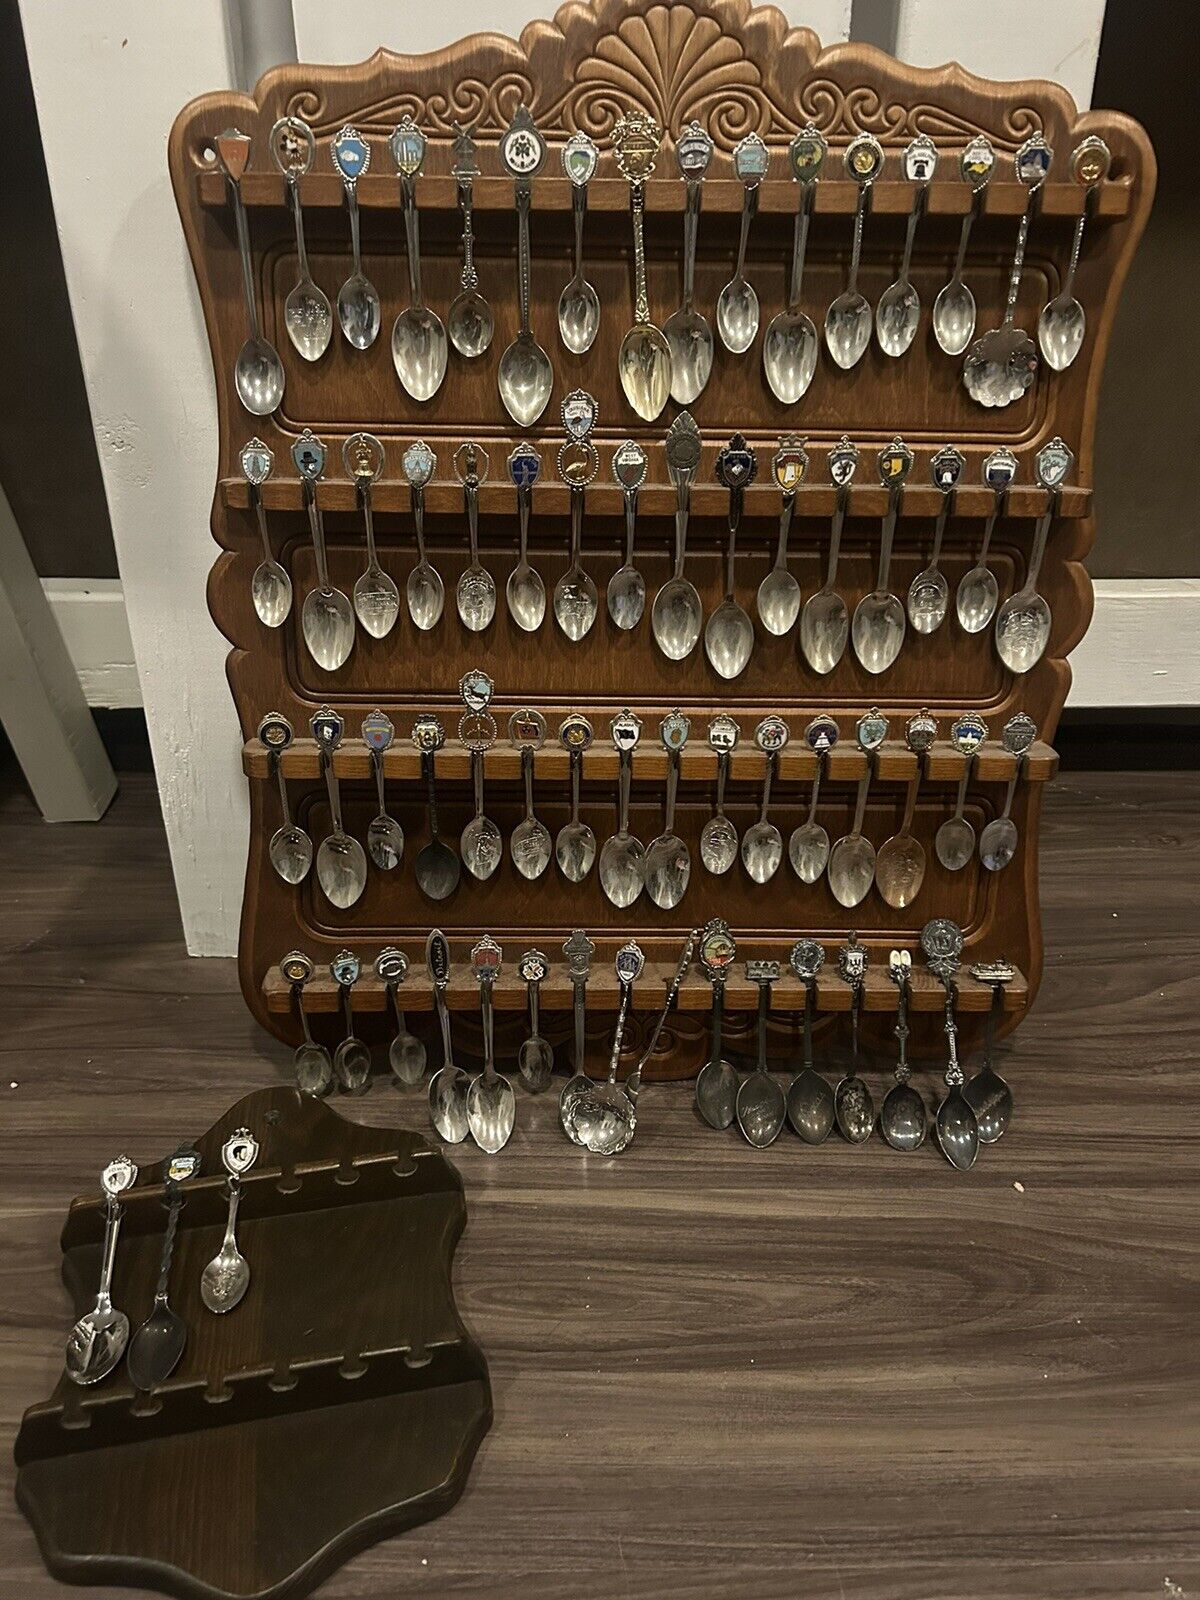 VINTAGE Lot Of 67 Mini Mixed Souvenir COLLECTOR'S SPOONS with display racks